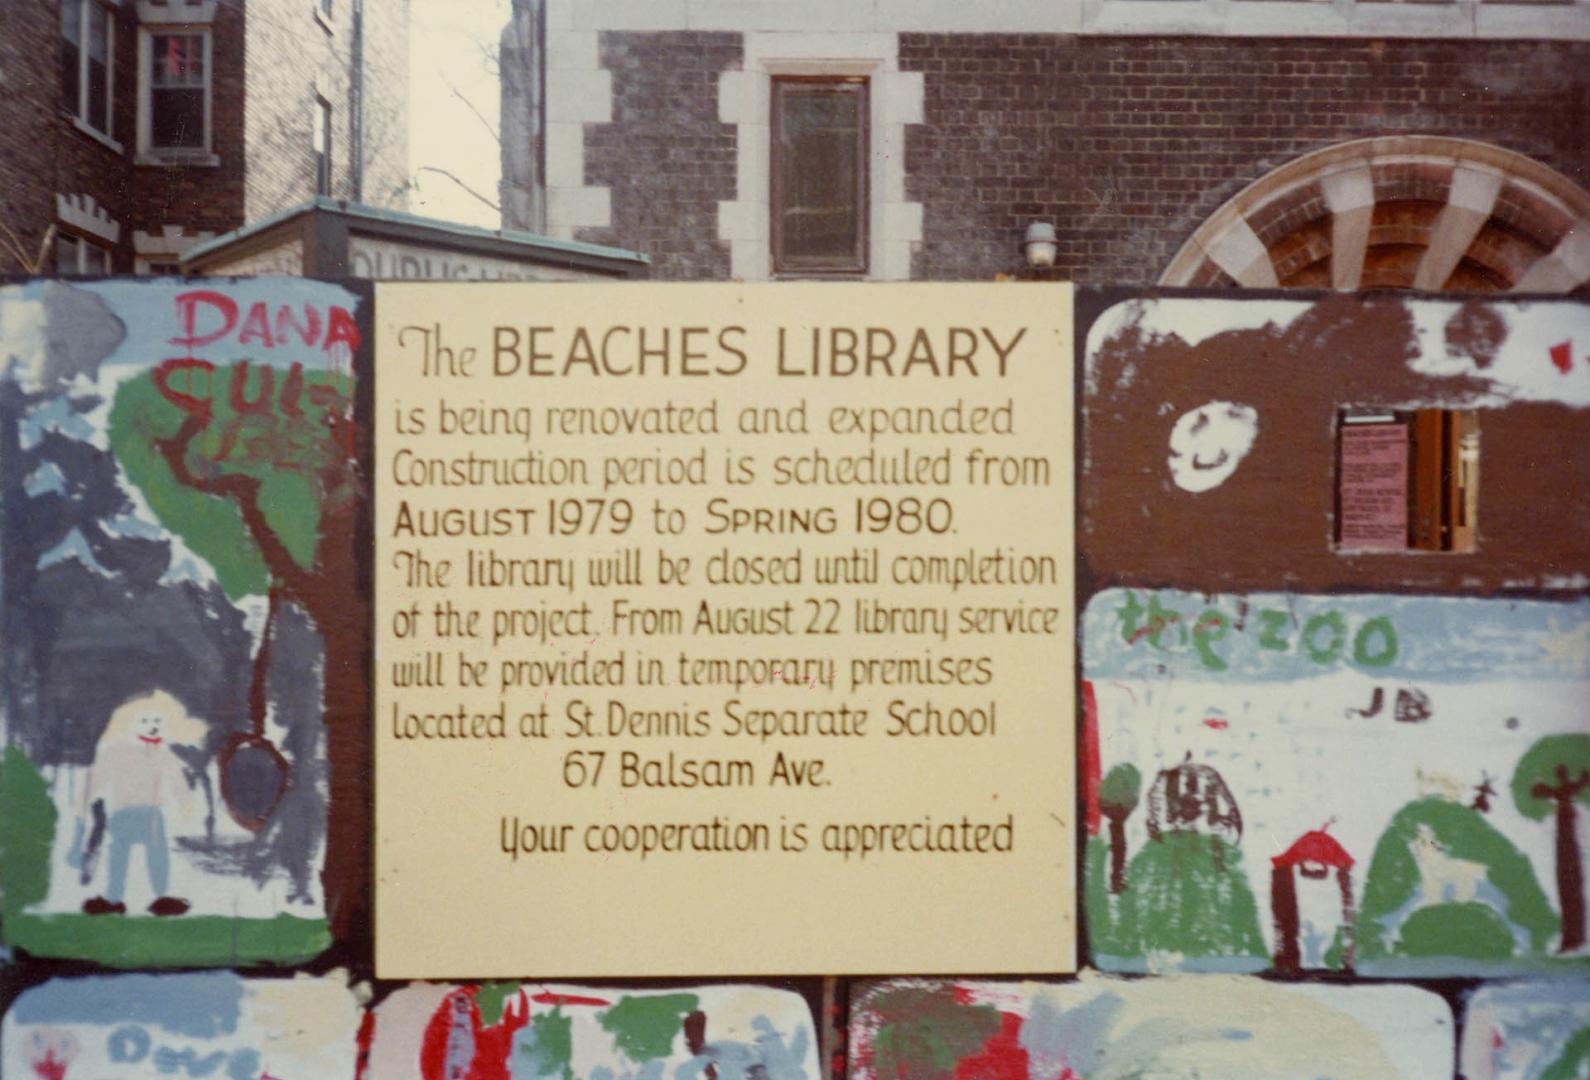 The Beaches Library is being renovated and expanded?